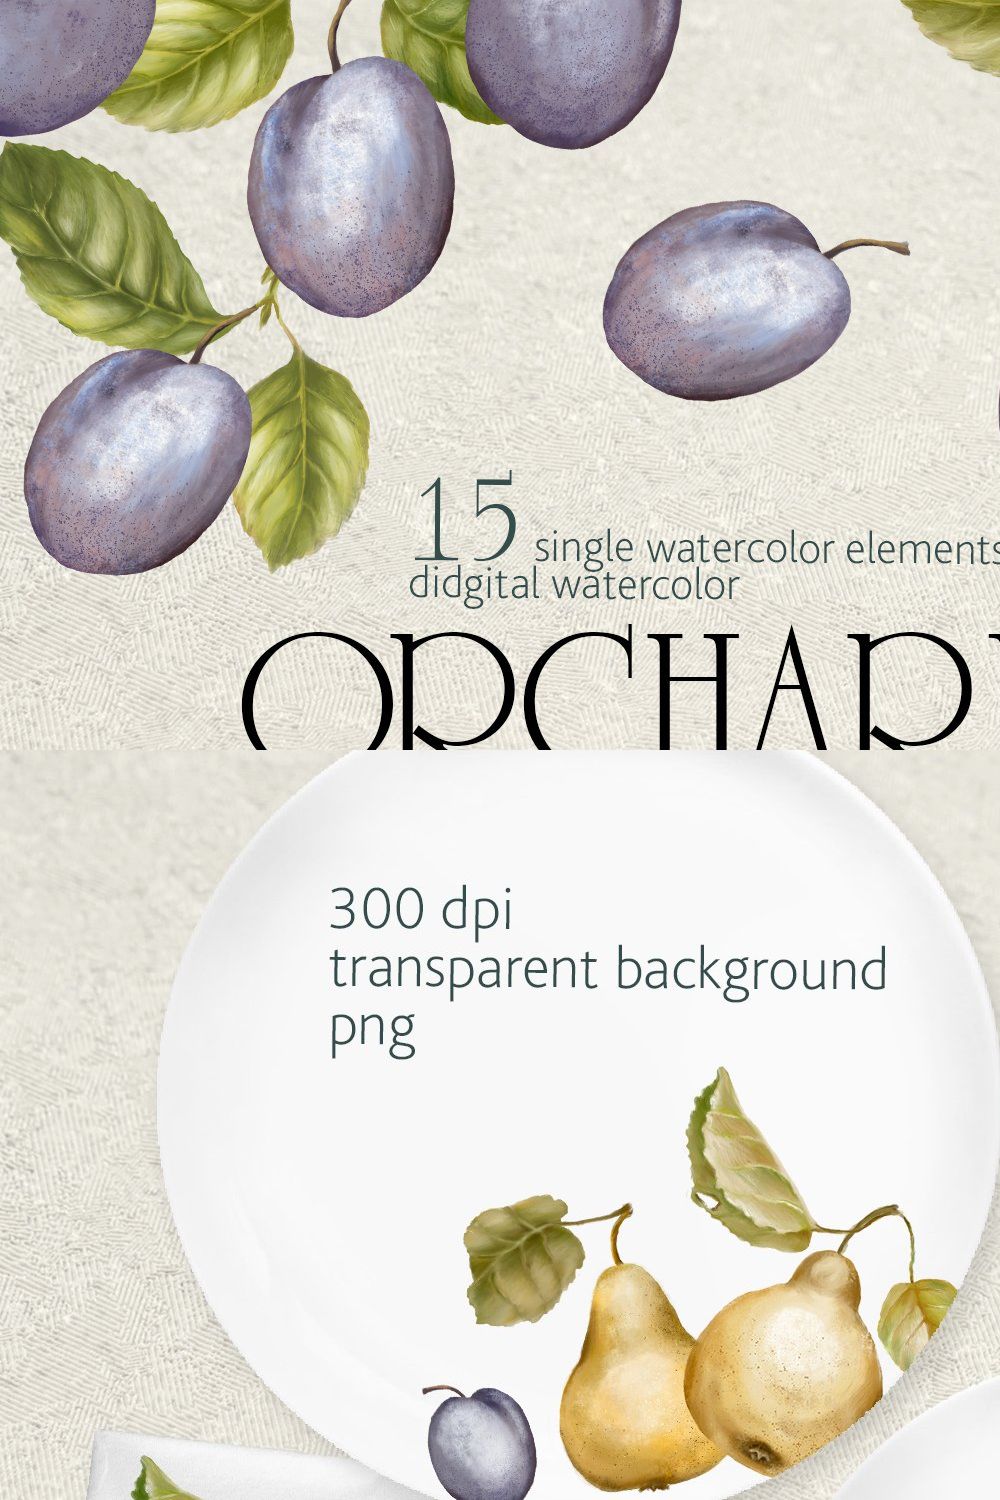 Orchard fruit. Pears and plums pinterest preview image.